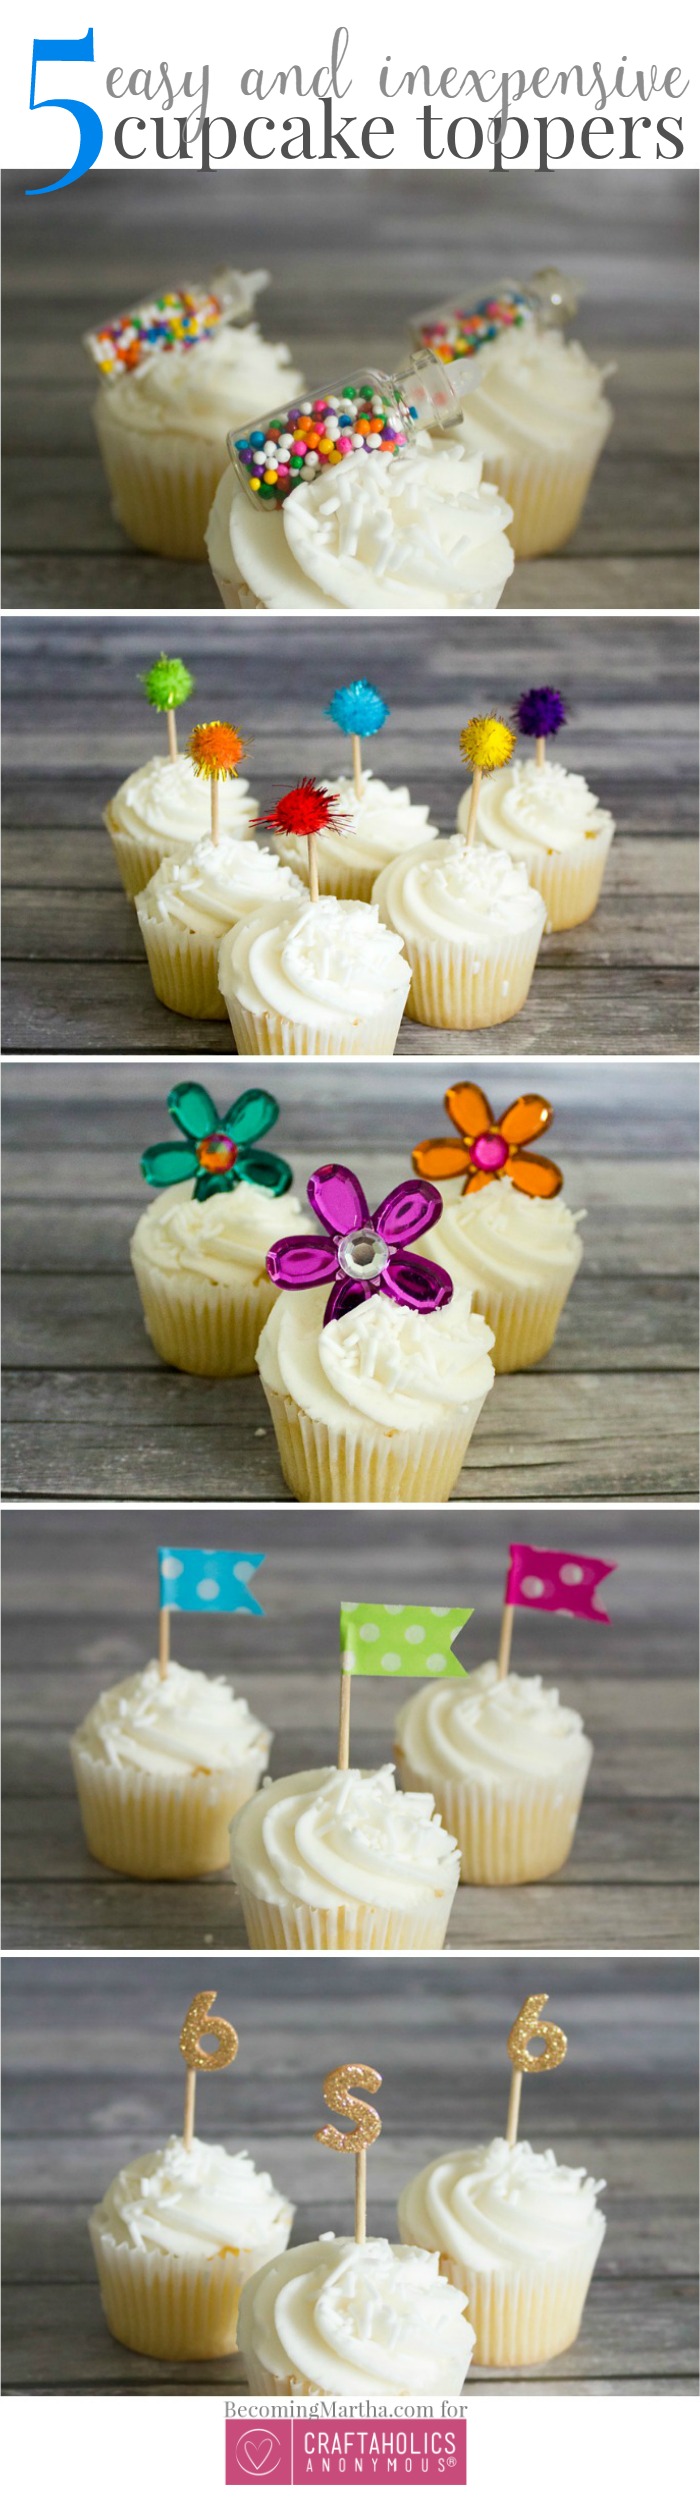 How to Make Easy Personalized Cupcake Toppers - Delishably